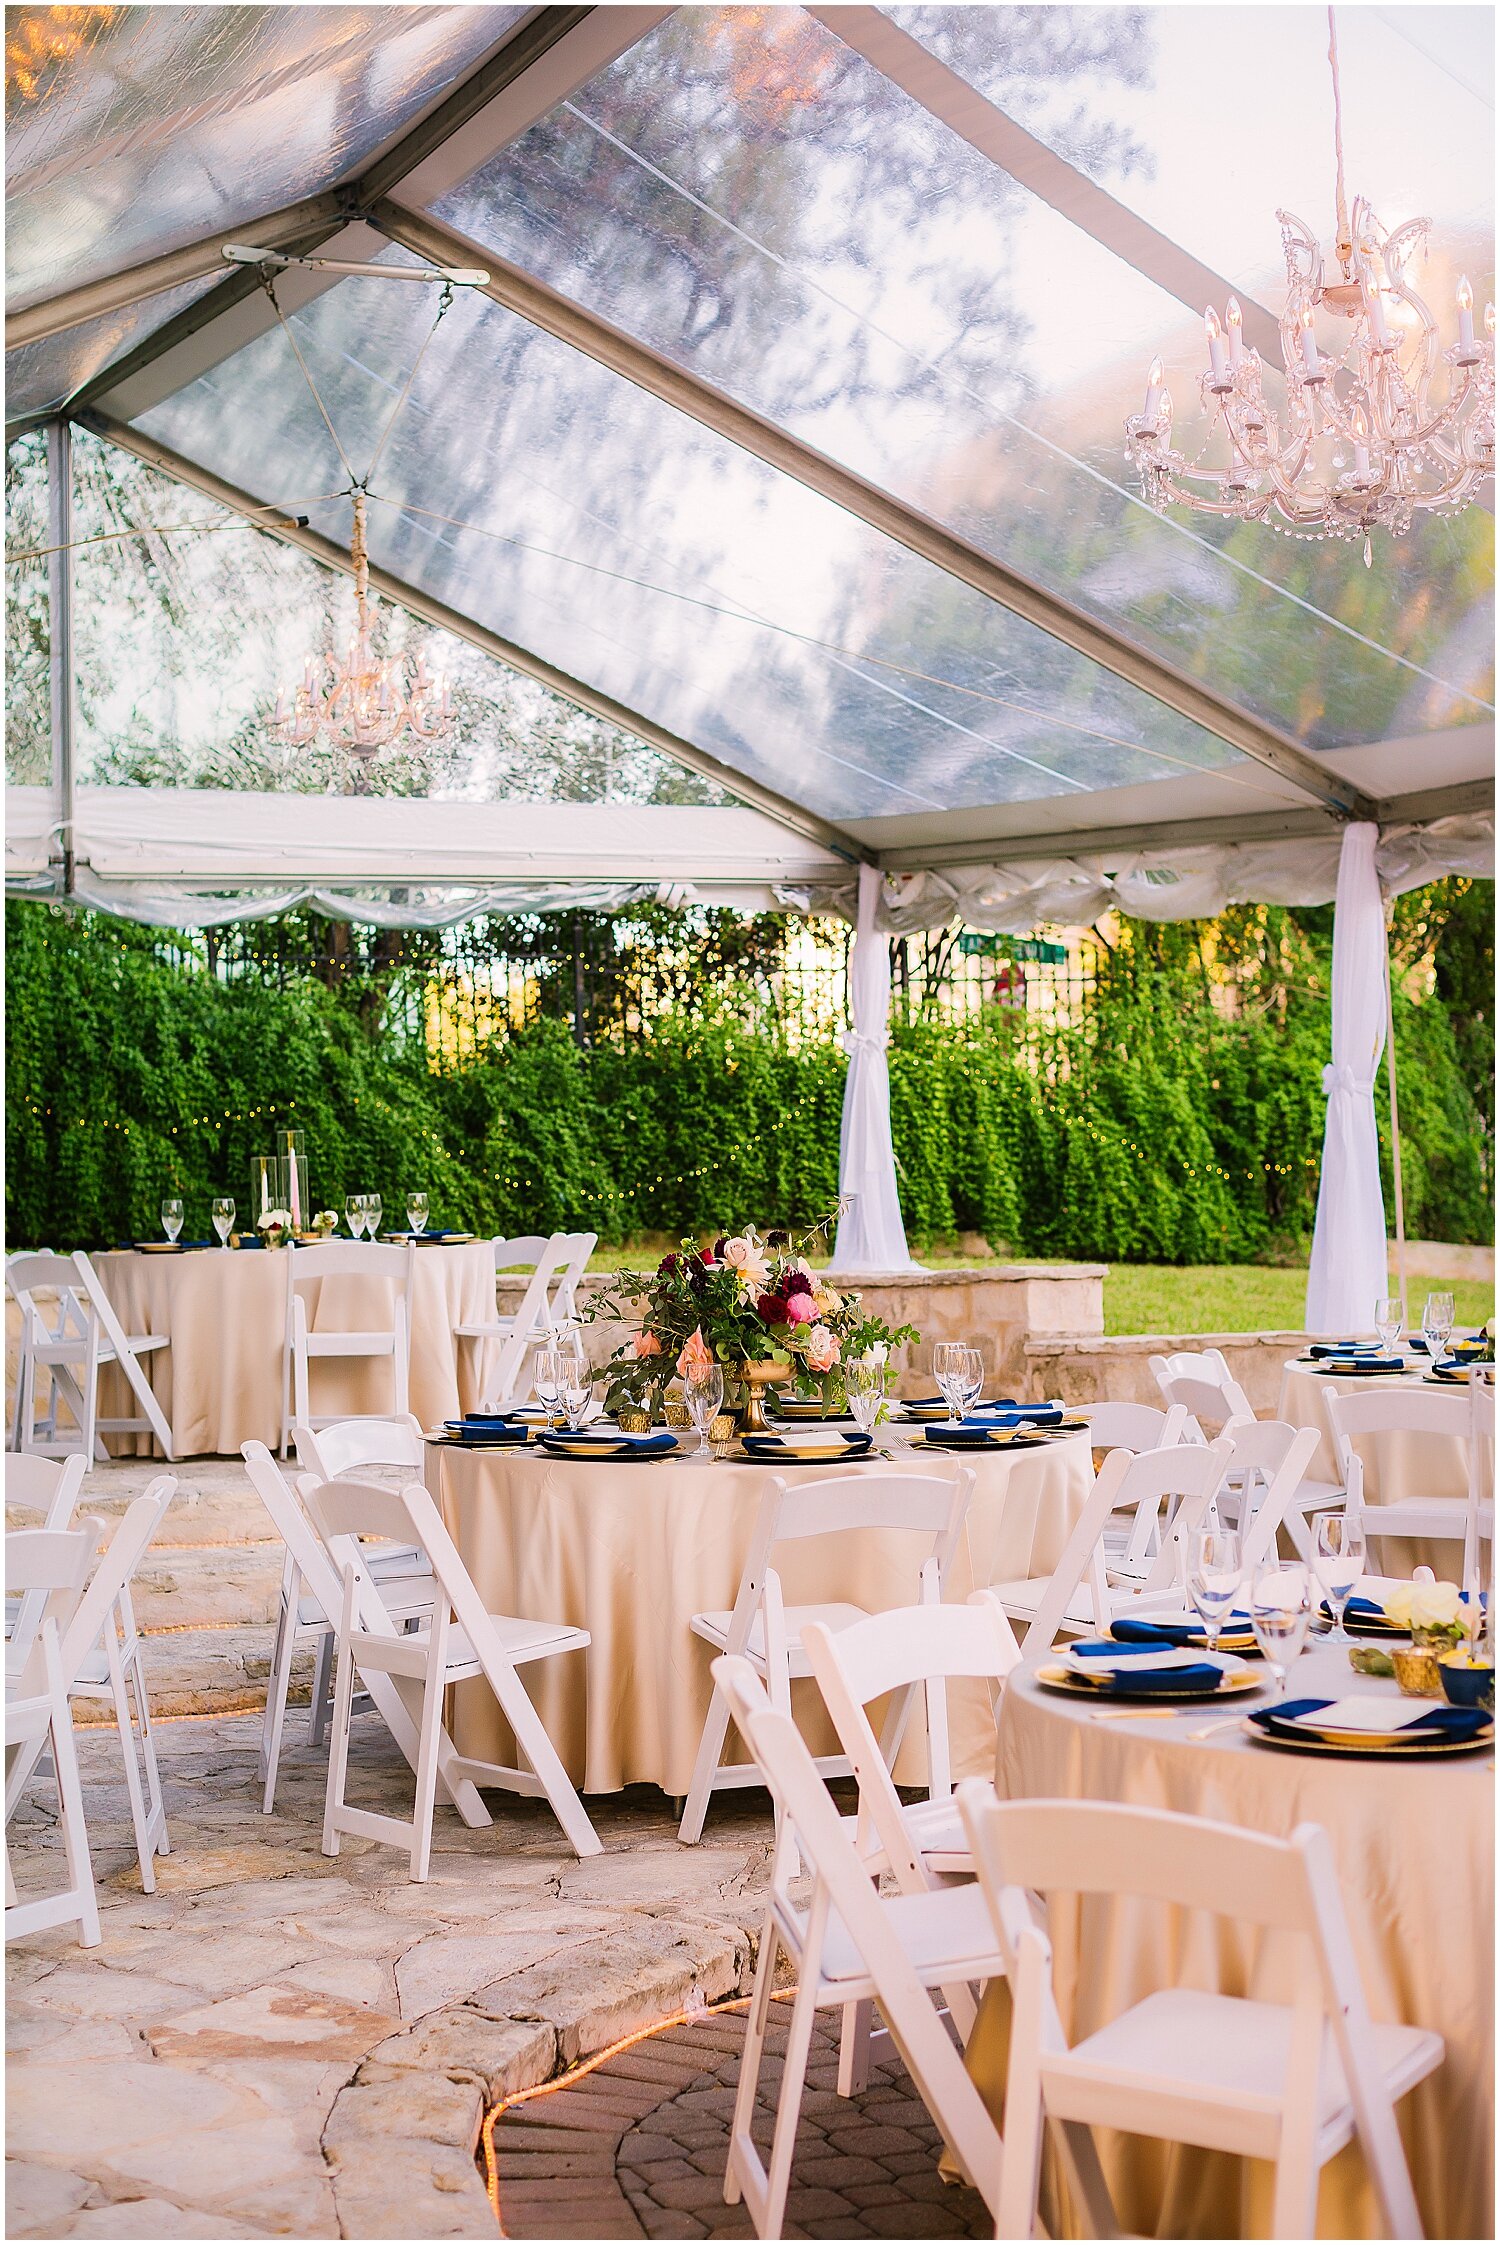  Tented wedding reception at The Allan House 